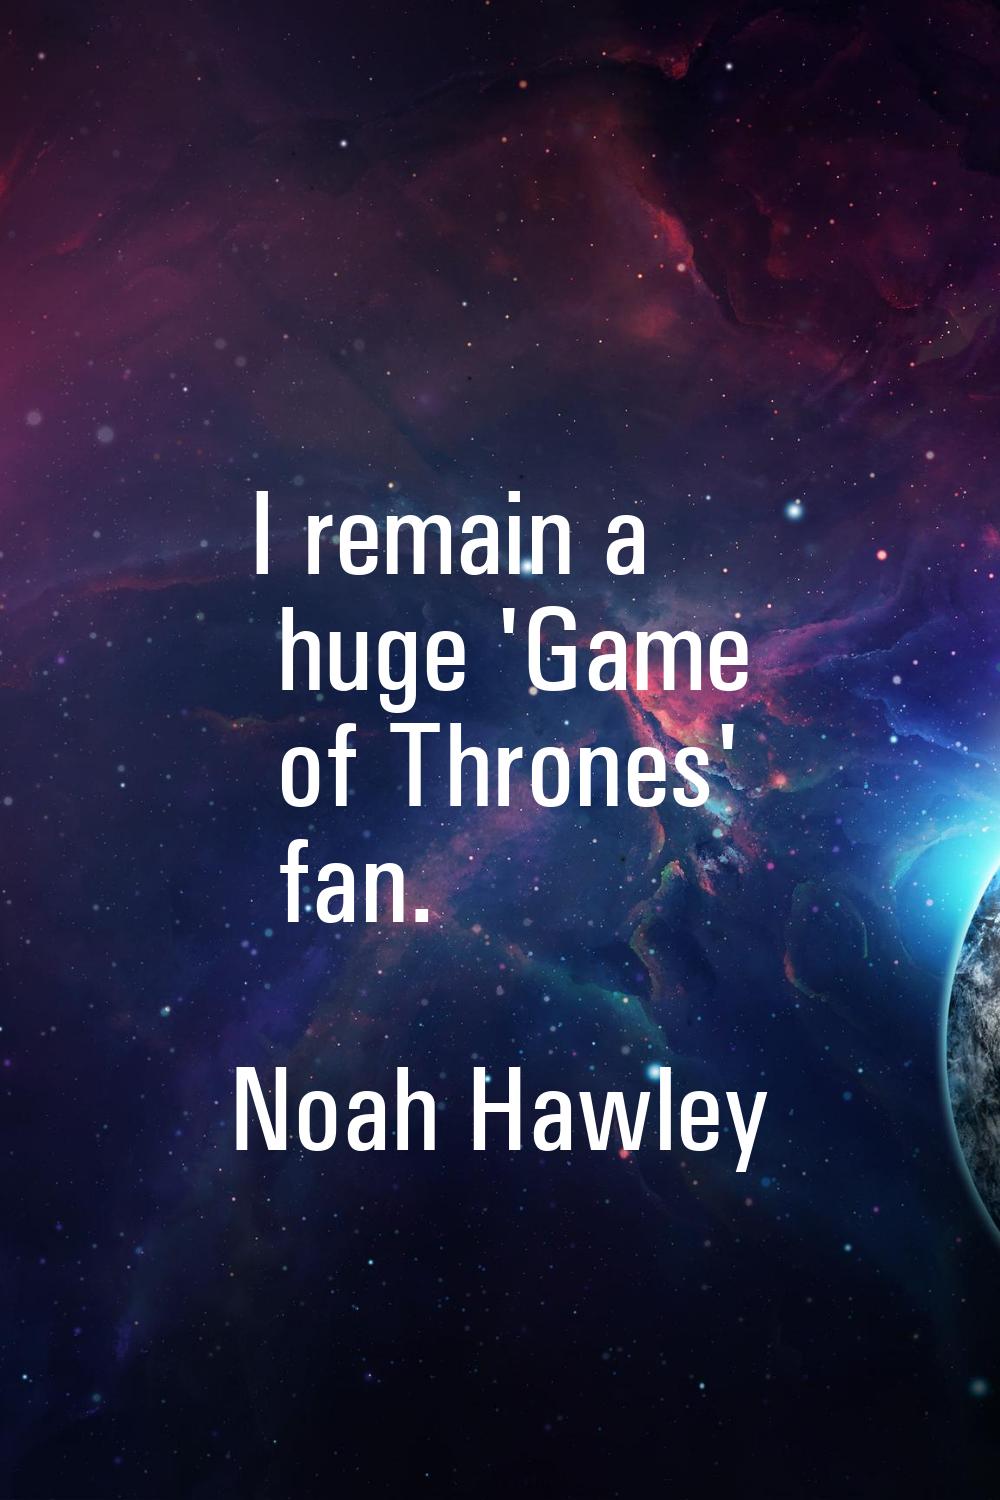 I remain a huge 'Game of Thrones' fan.